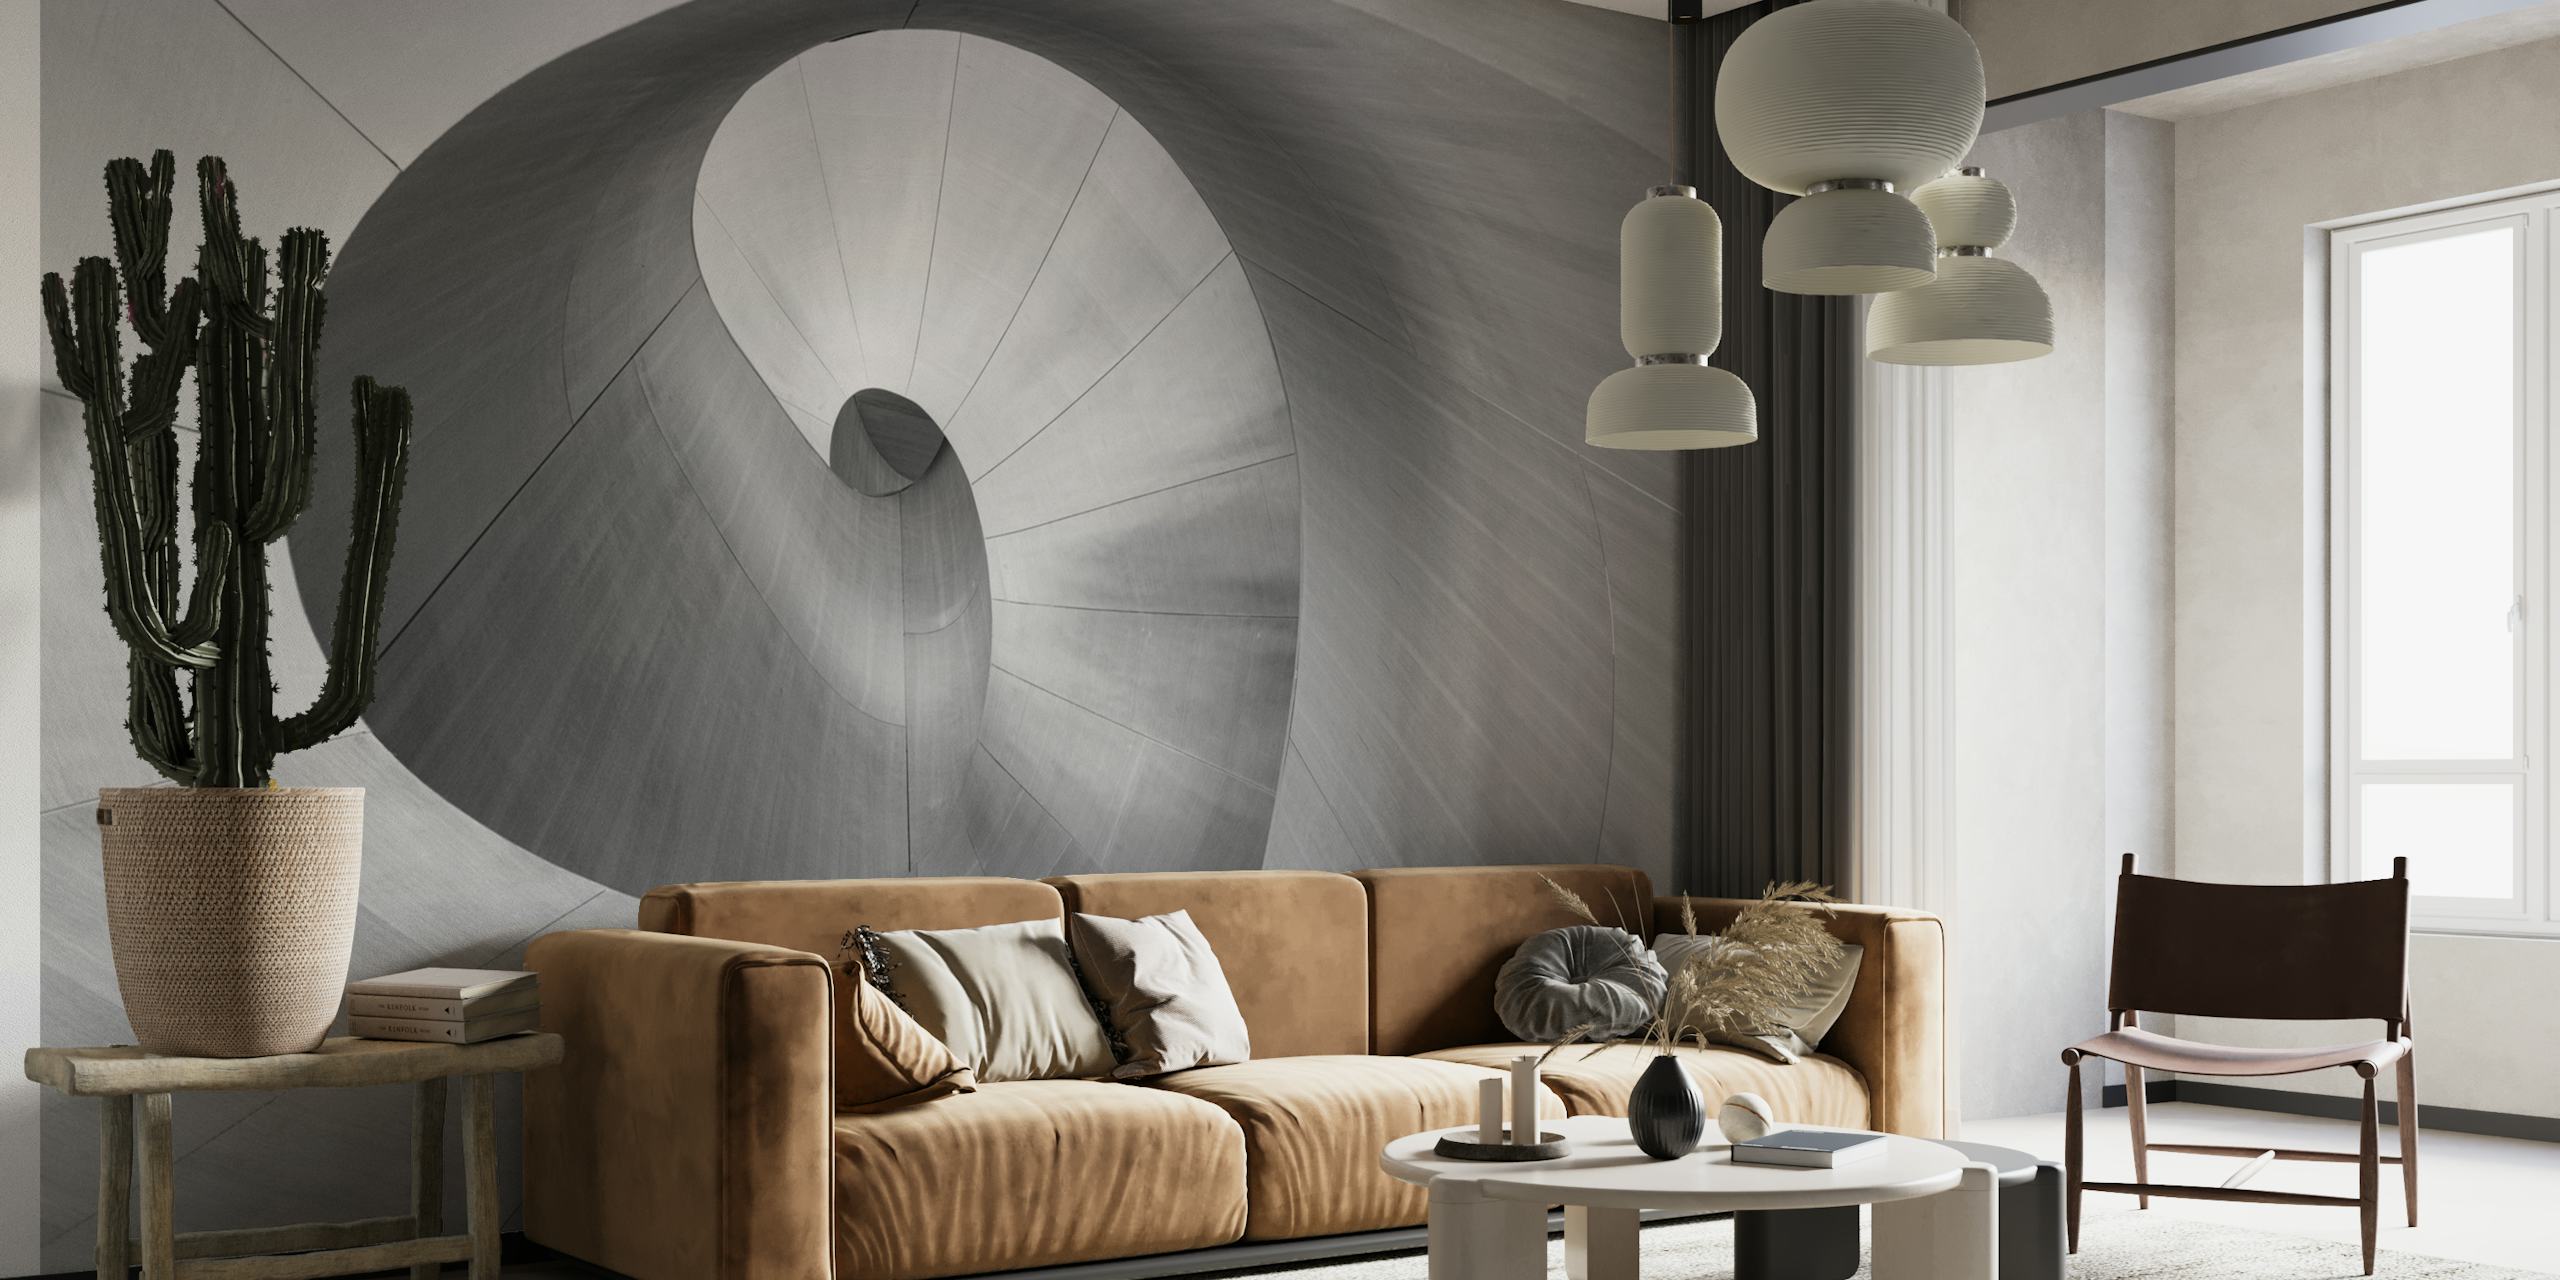 Black and white abstract mural featuring spiraling curves